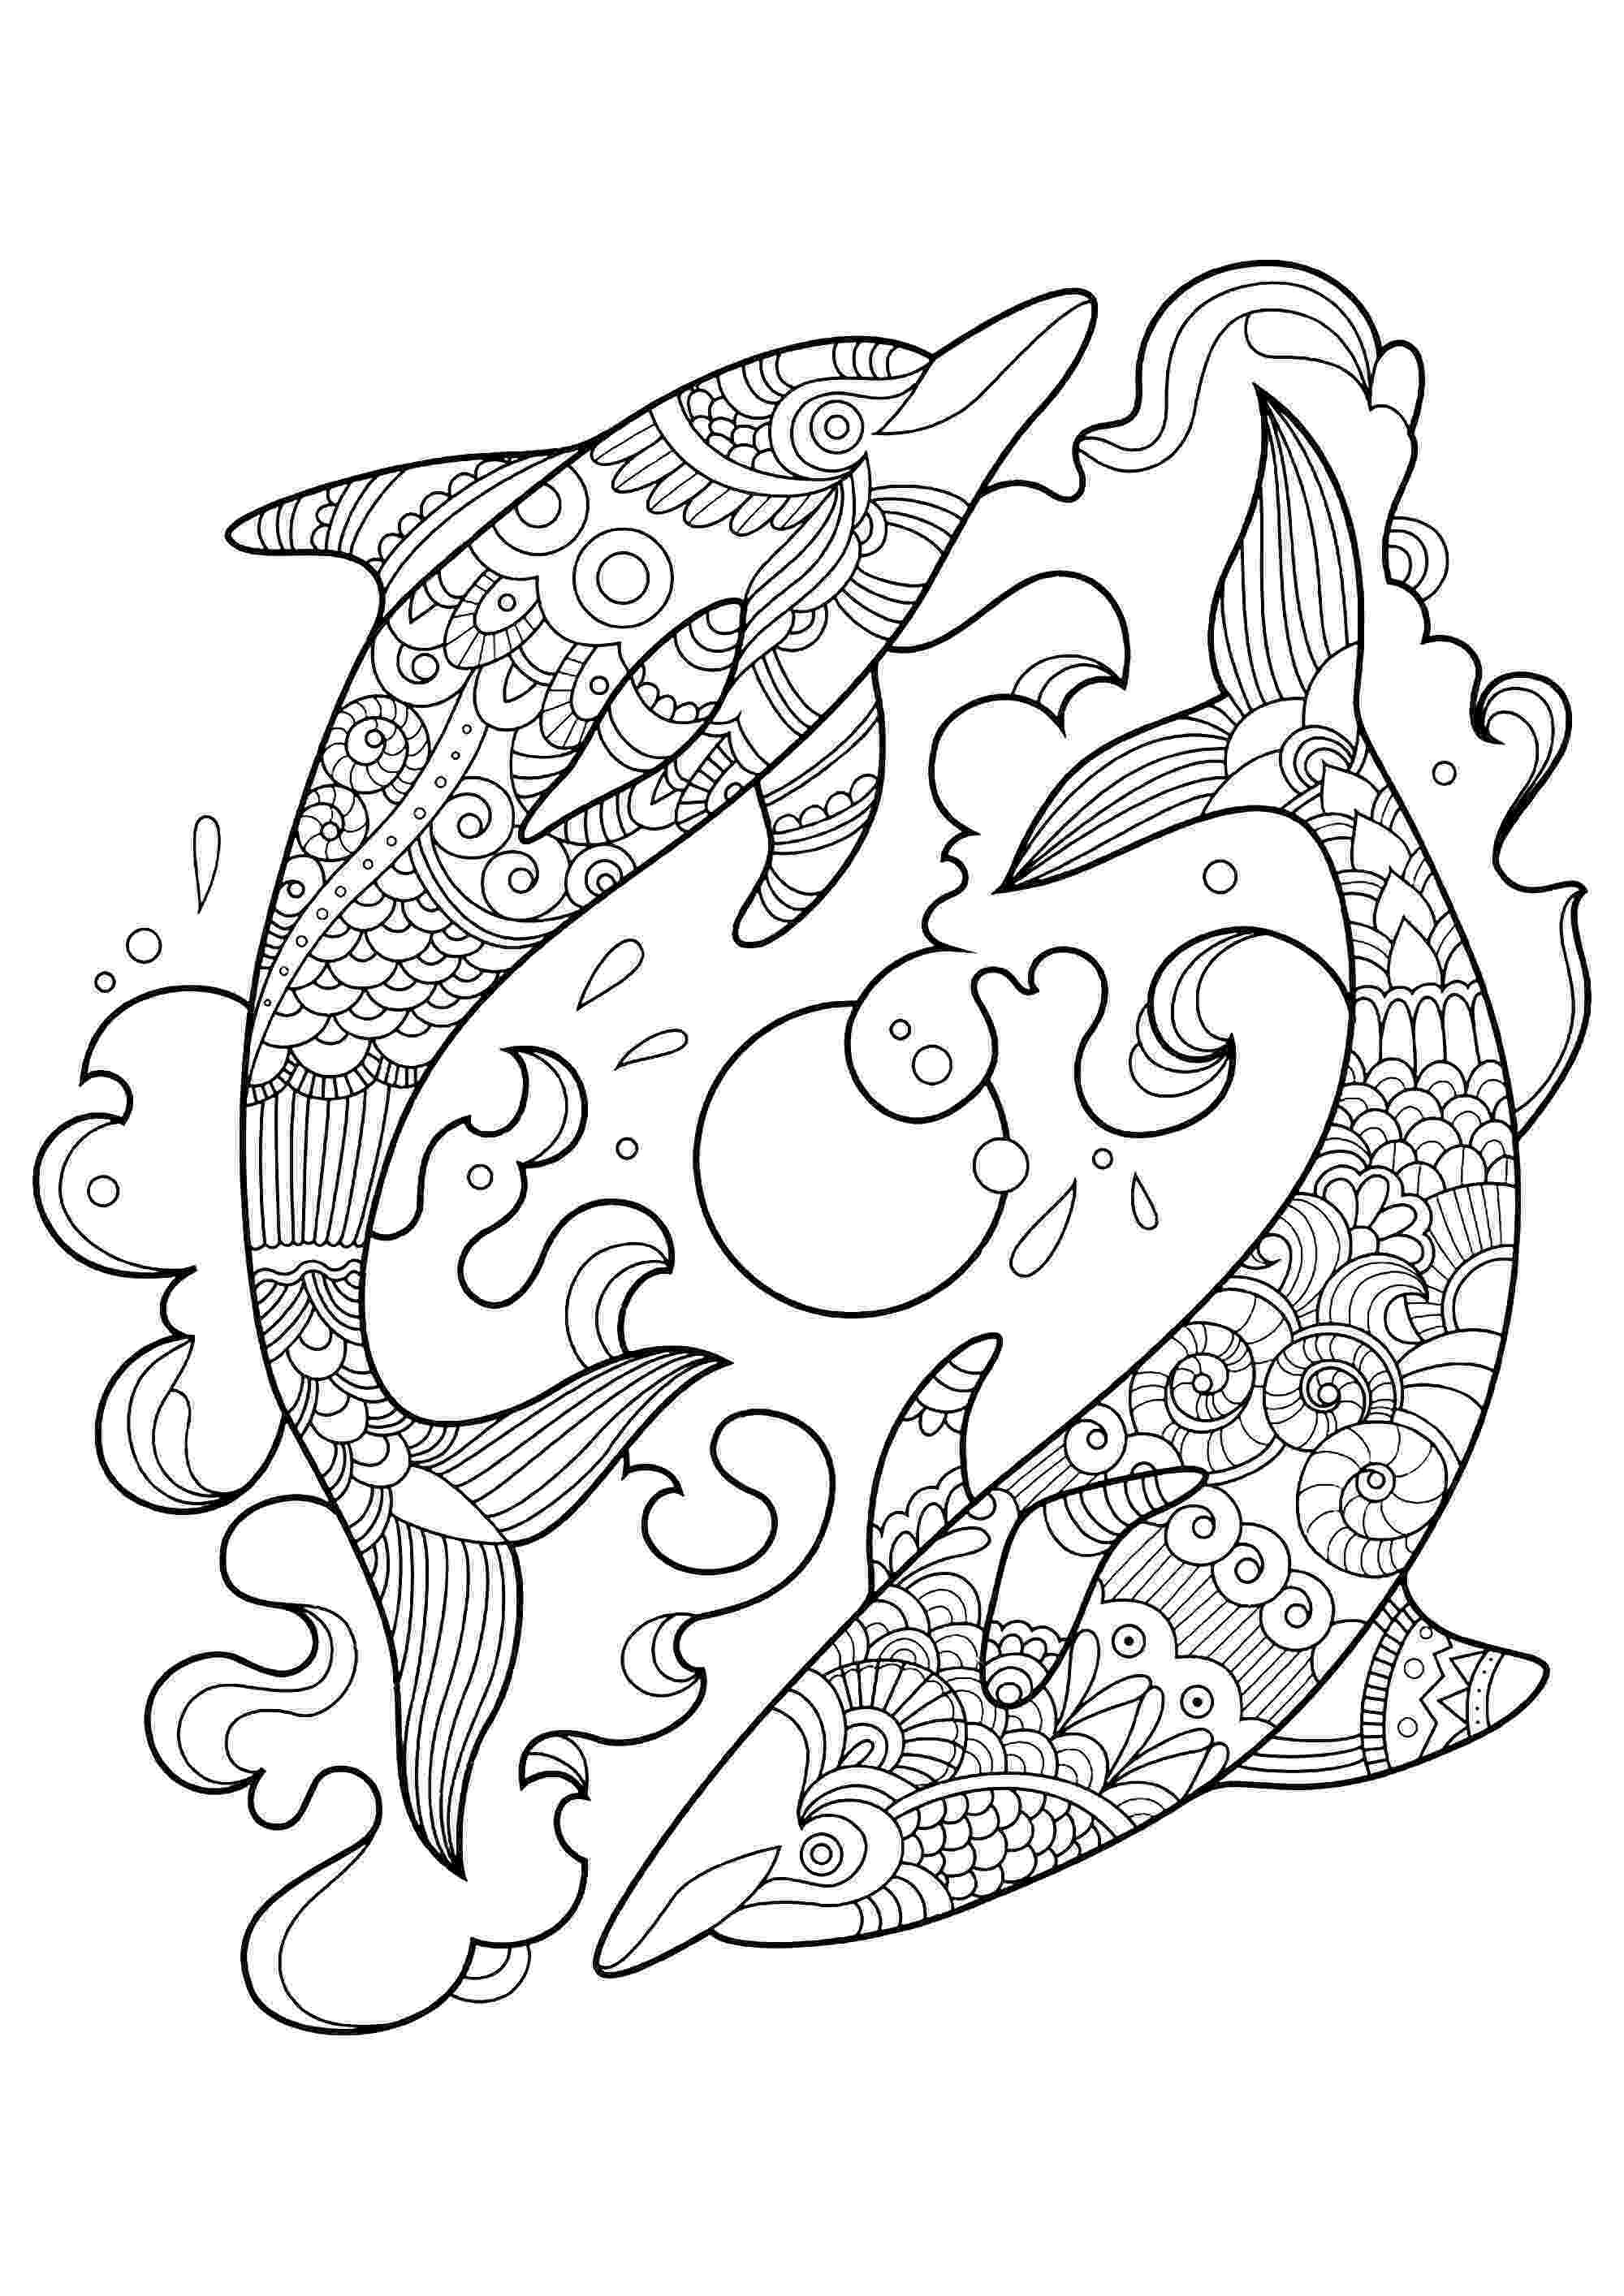 dolphin coloring pages to print two dolphins in the ocean dolphins adult coloring pages to coloring print pages dolphin 